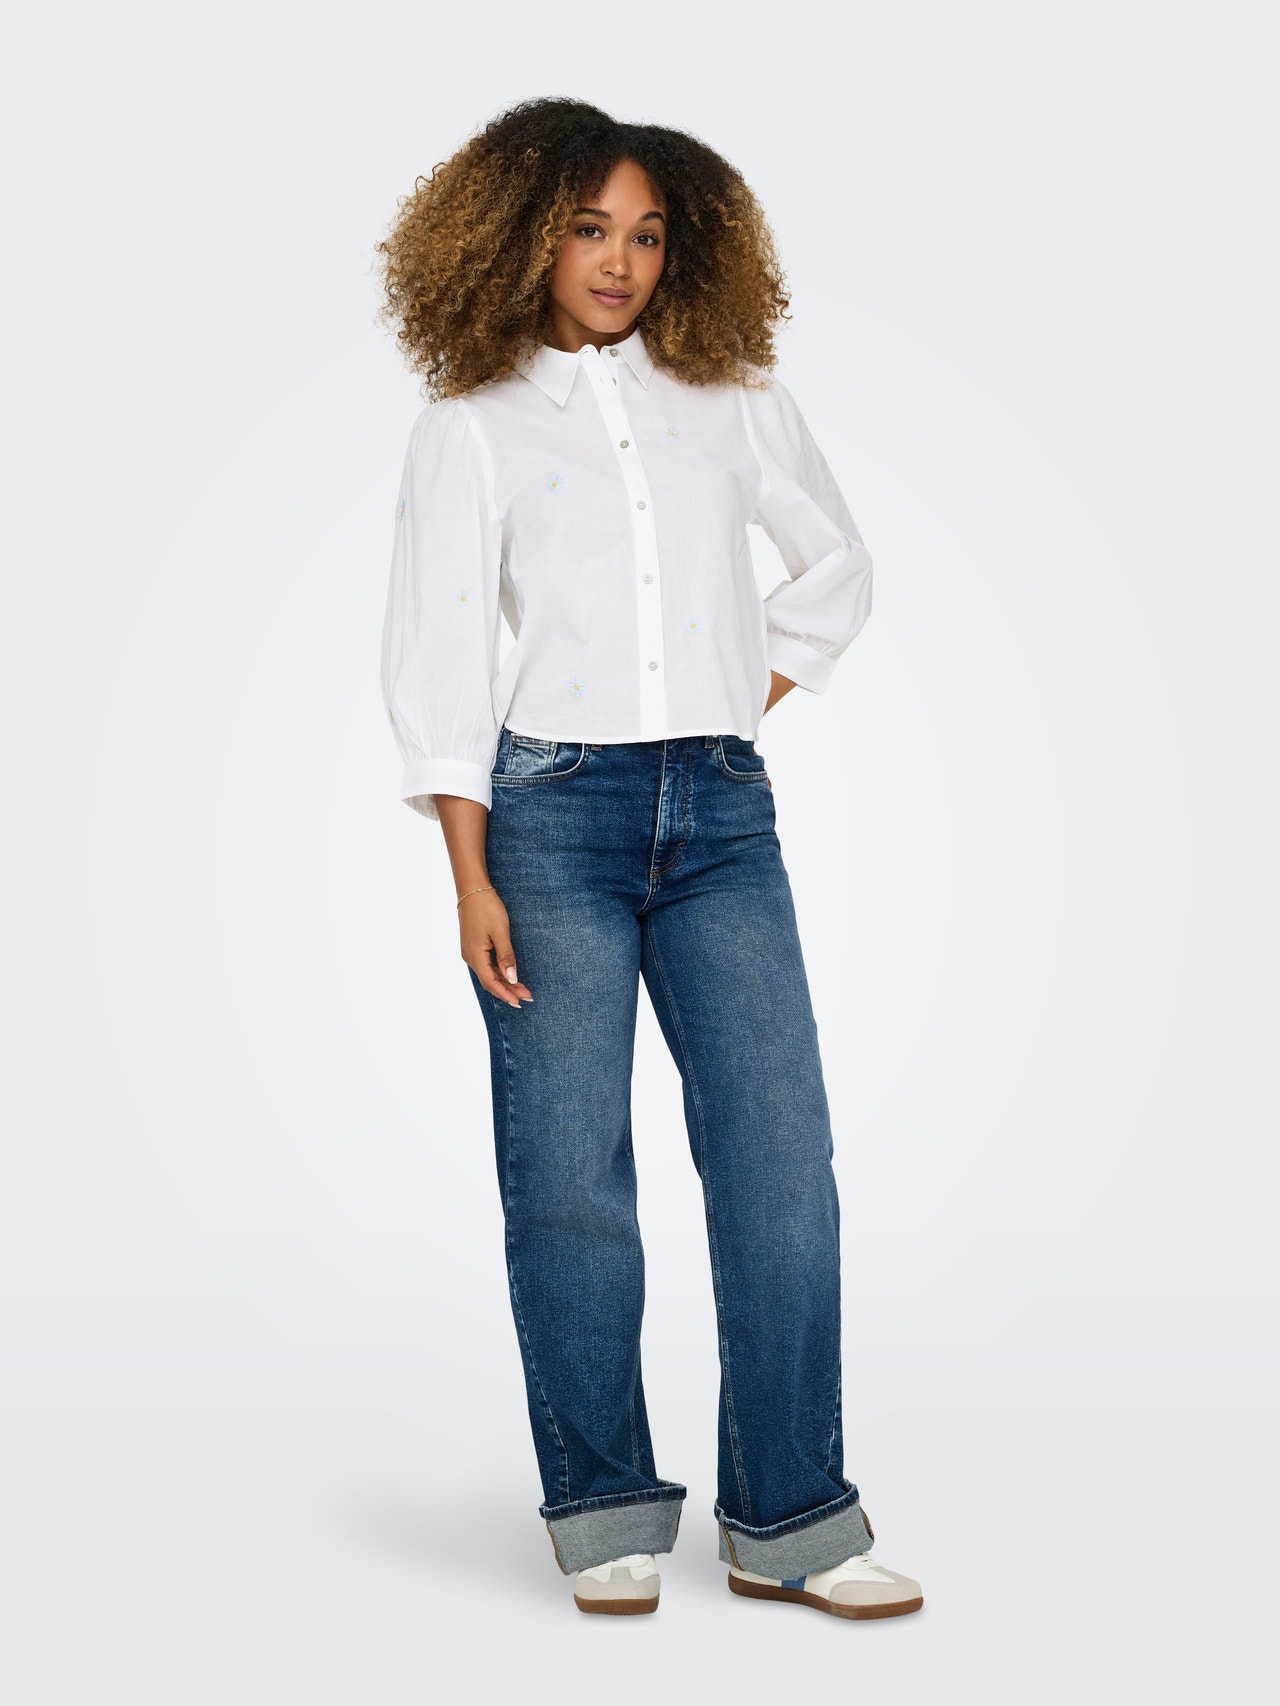 ONLY Box Fit Shirt collar Buttoned cuffs Volume sleeves Shirt -Bright White - 15264753